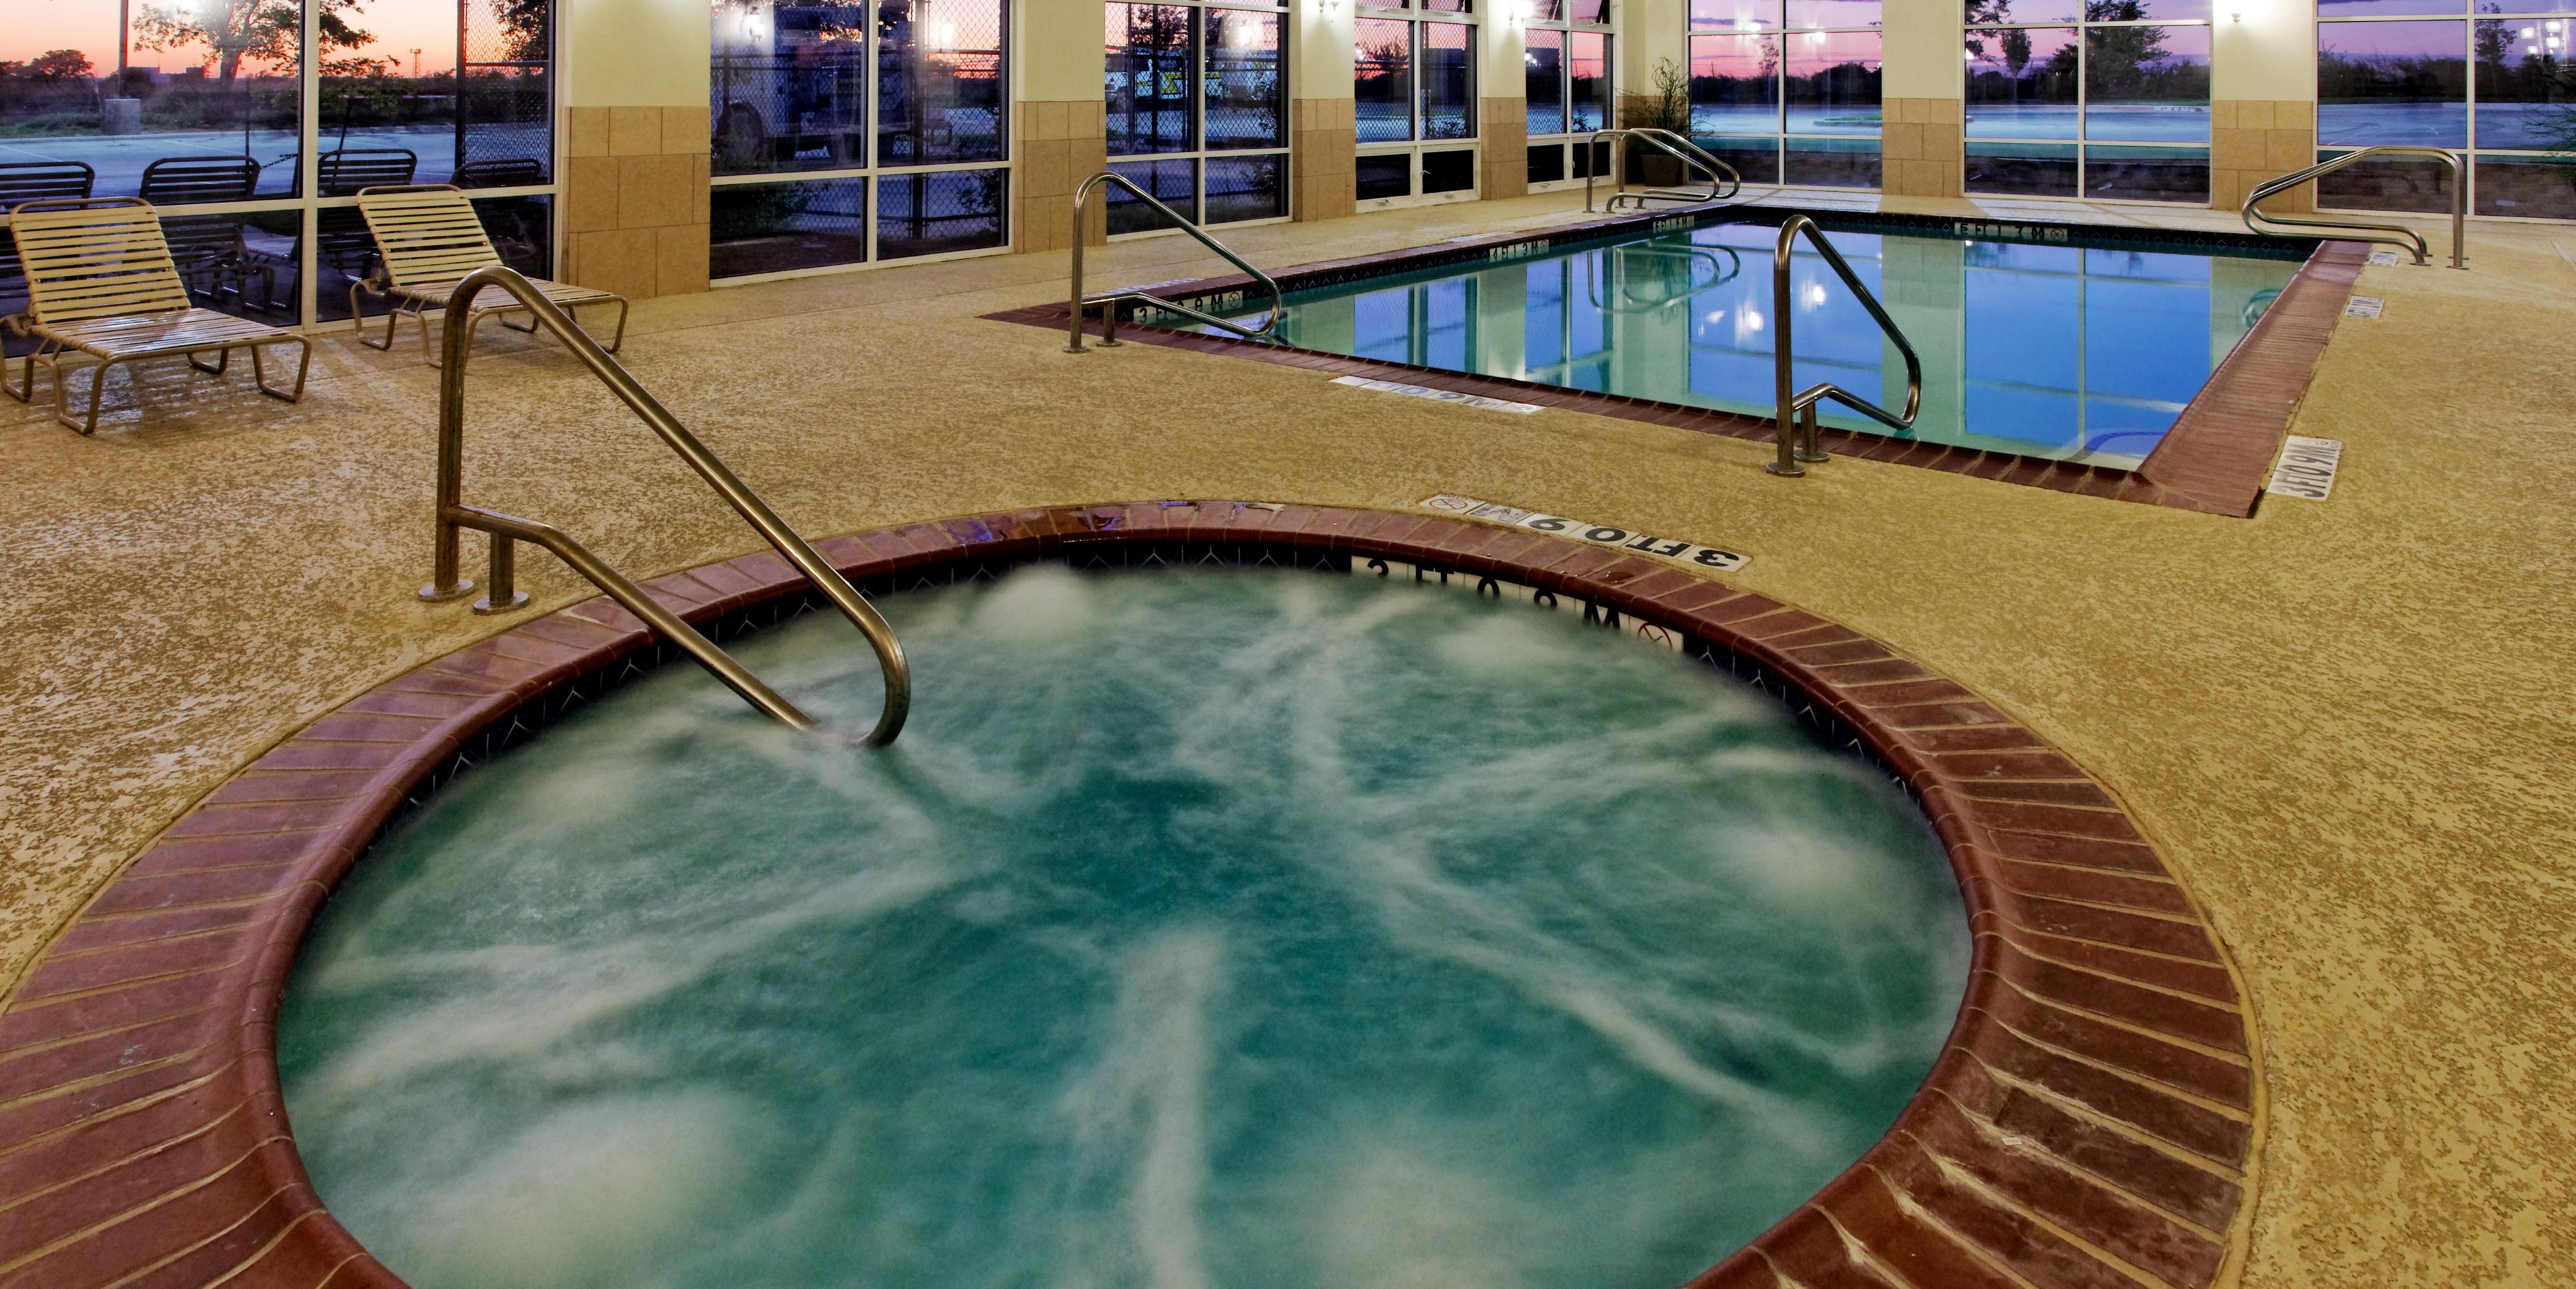 After a long day of travel or work, relax in our indoor heated pool and hot tub.  